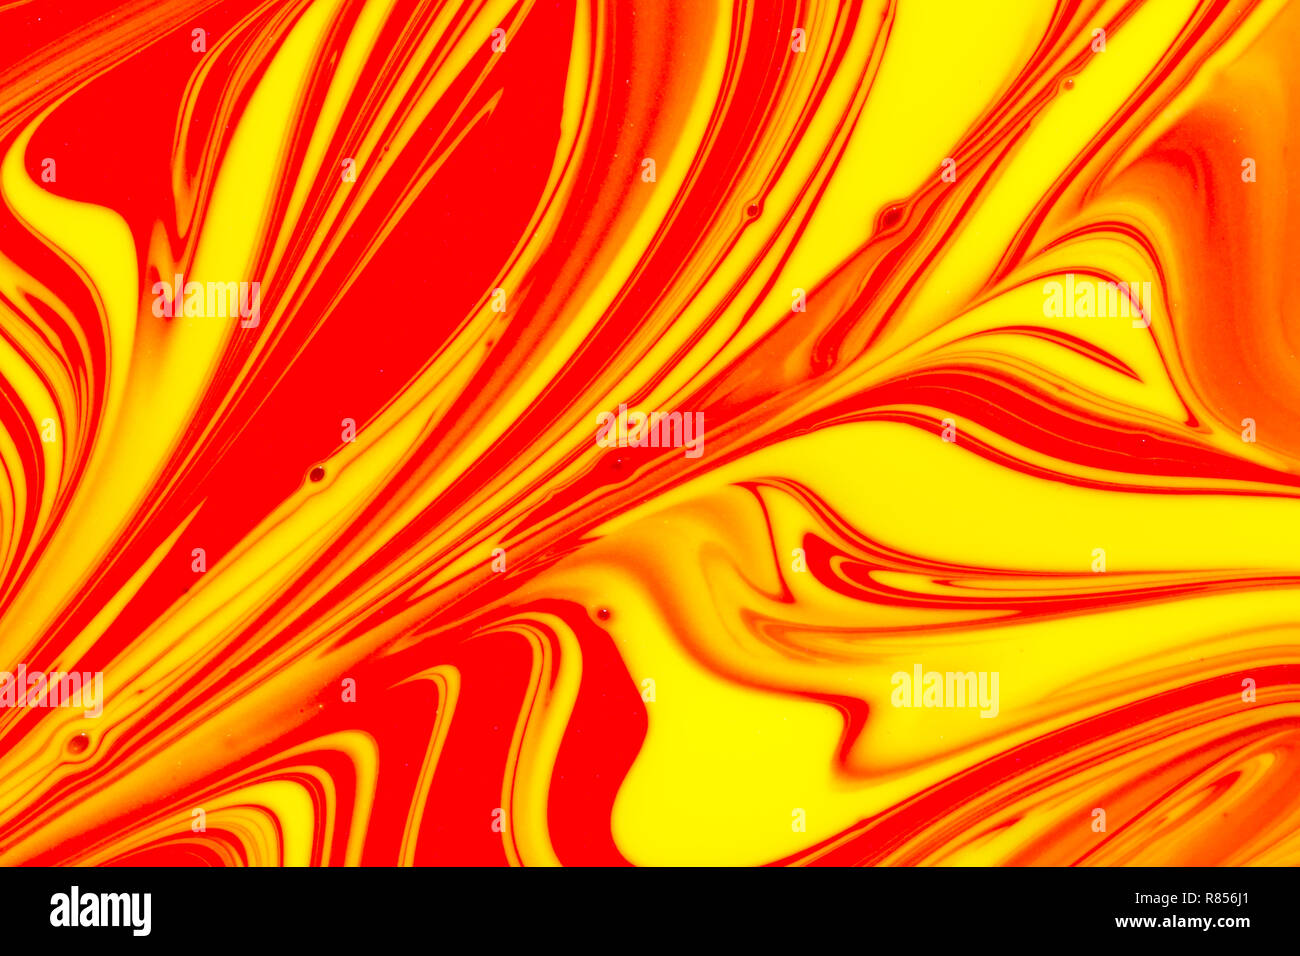 Abstract background of red, orange and yellow swirls of liquid pant Stock Photo